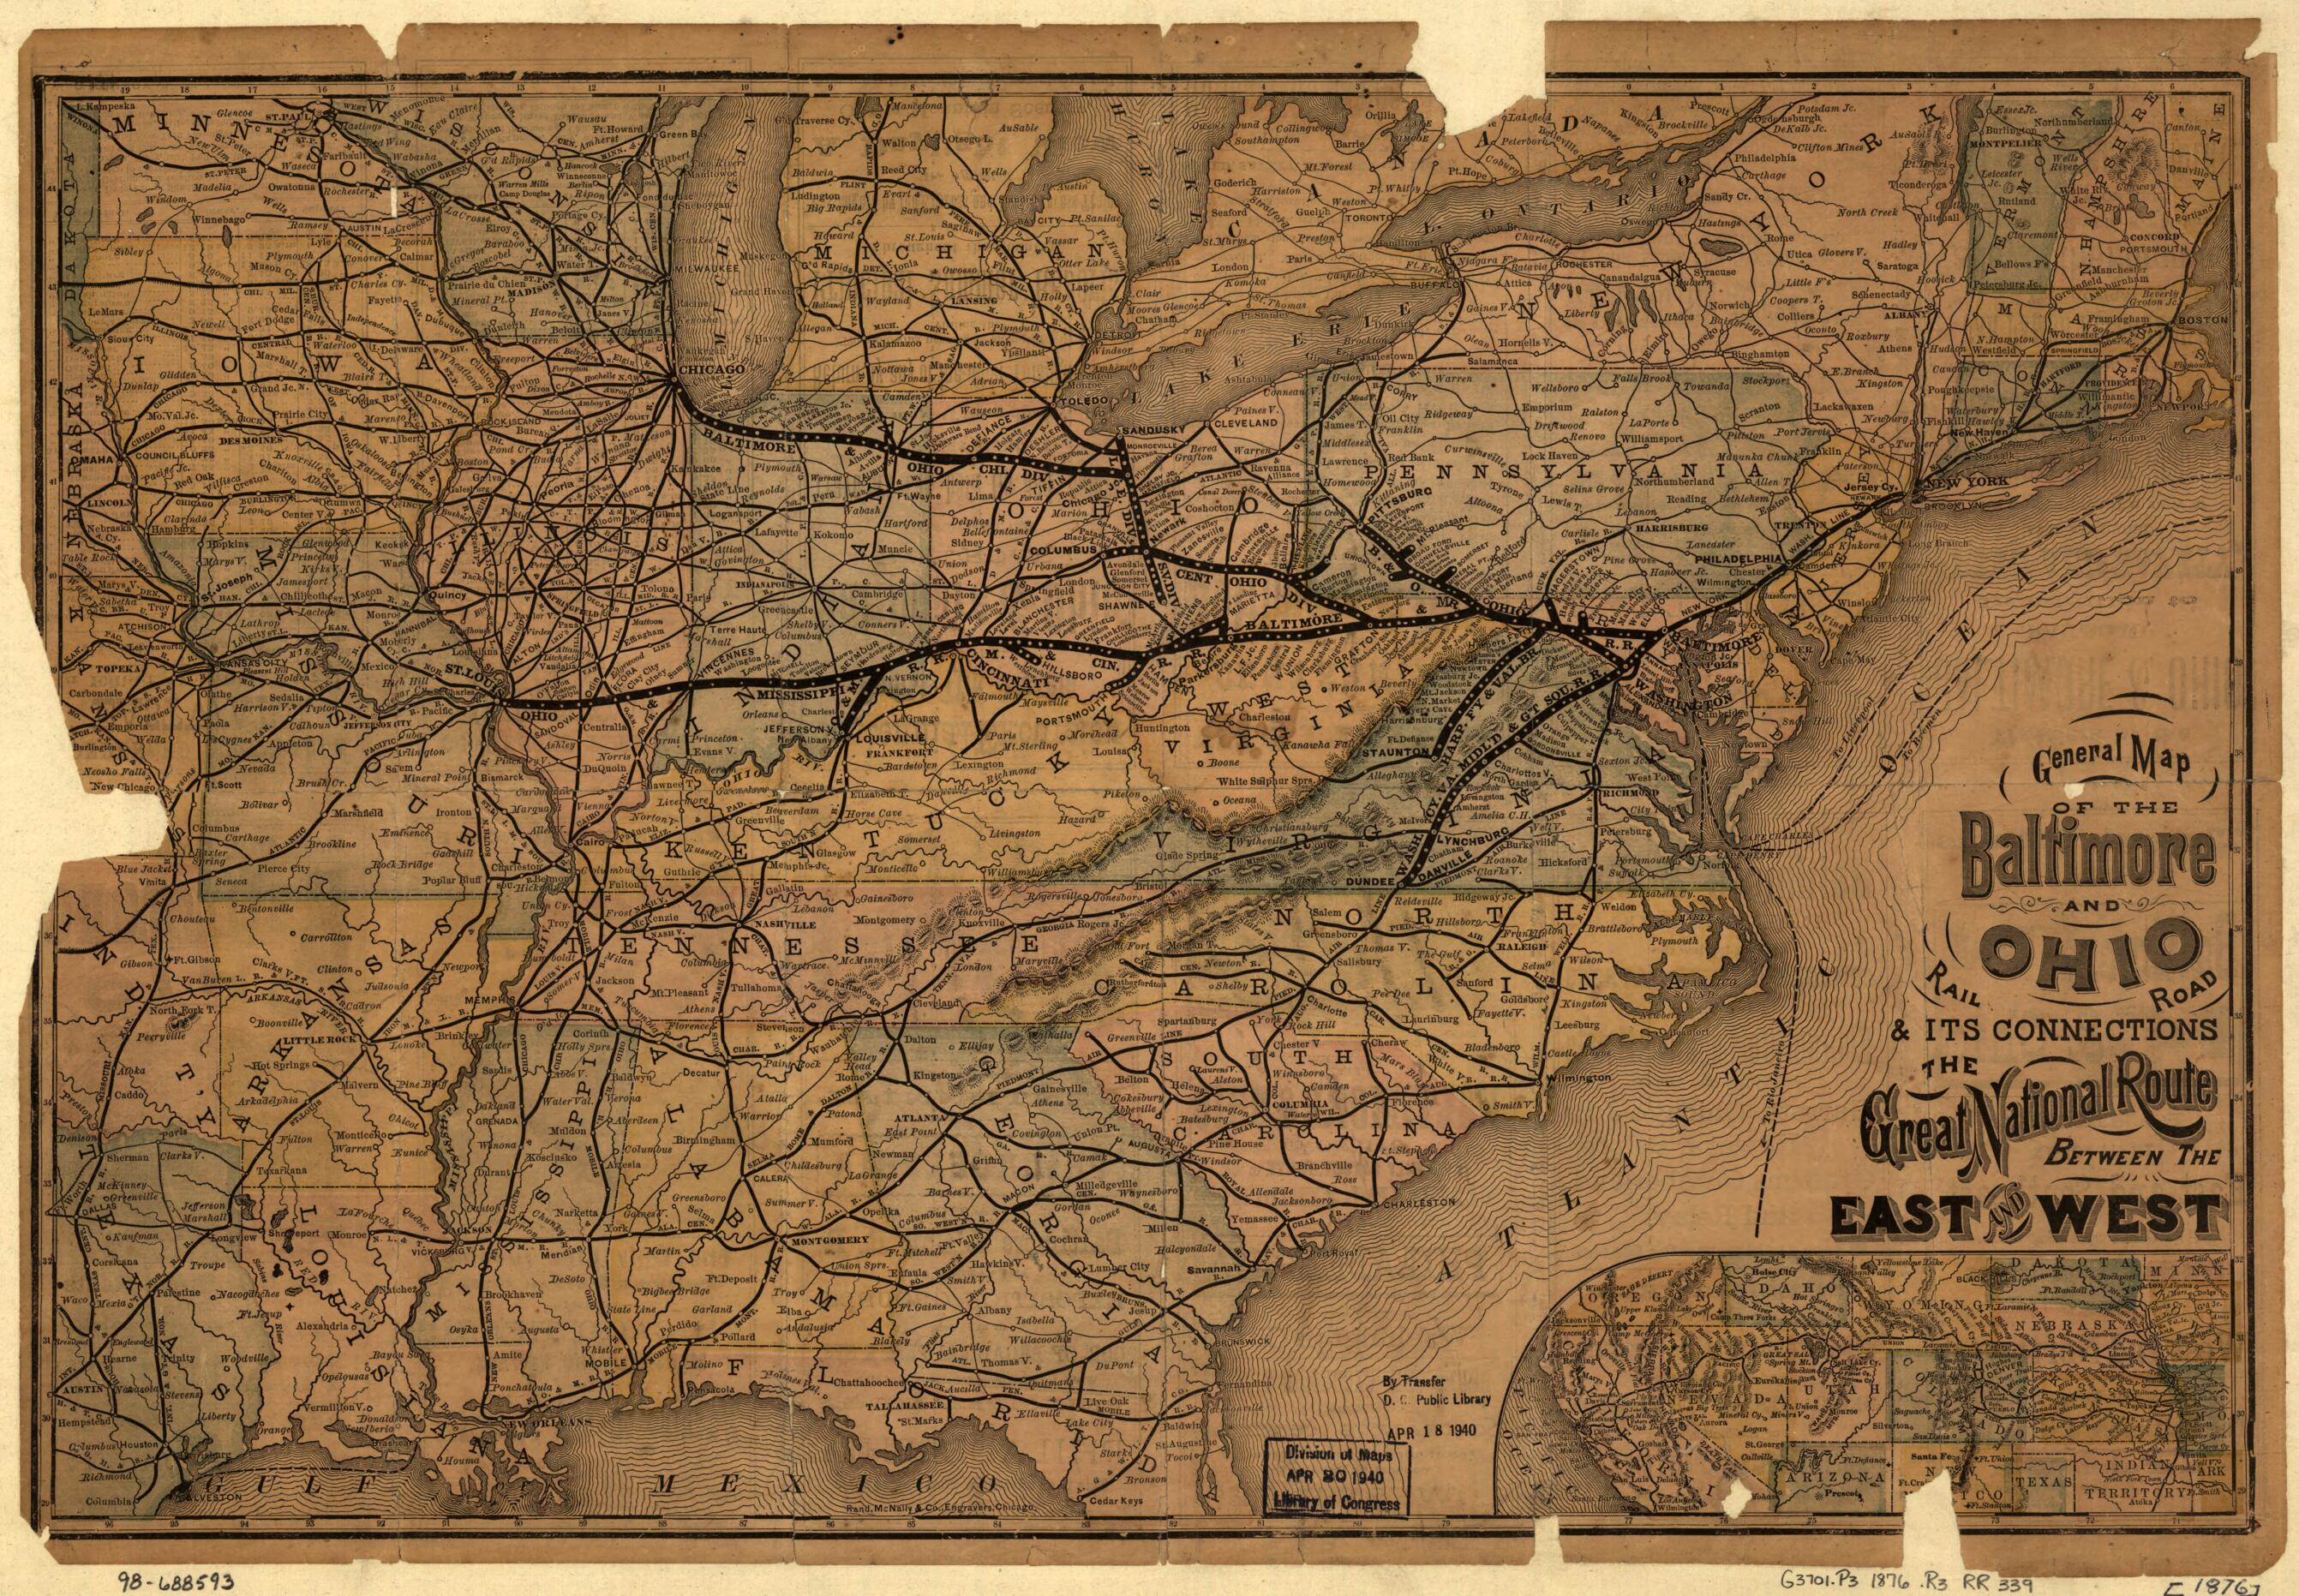 This old map of General Map of the Baltimore and Ohio Rail Road &amp; Its Connections; the Great National Route Between the East and West from 1876 was created by  Baltimore and Ohio Railroad Company,  Rand McNally and Company in 1876